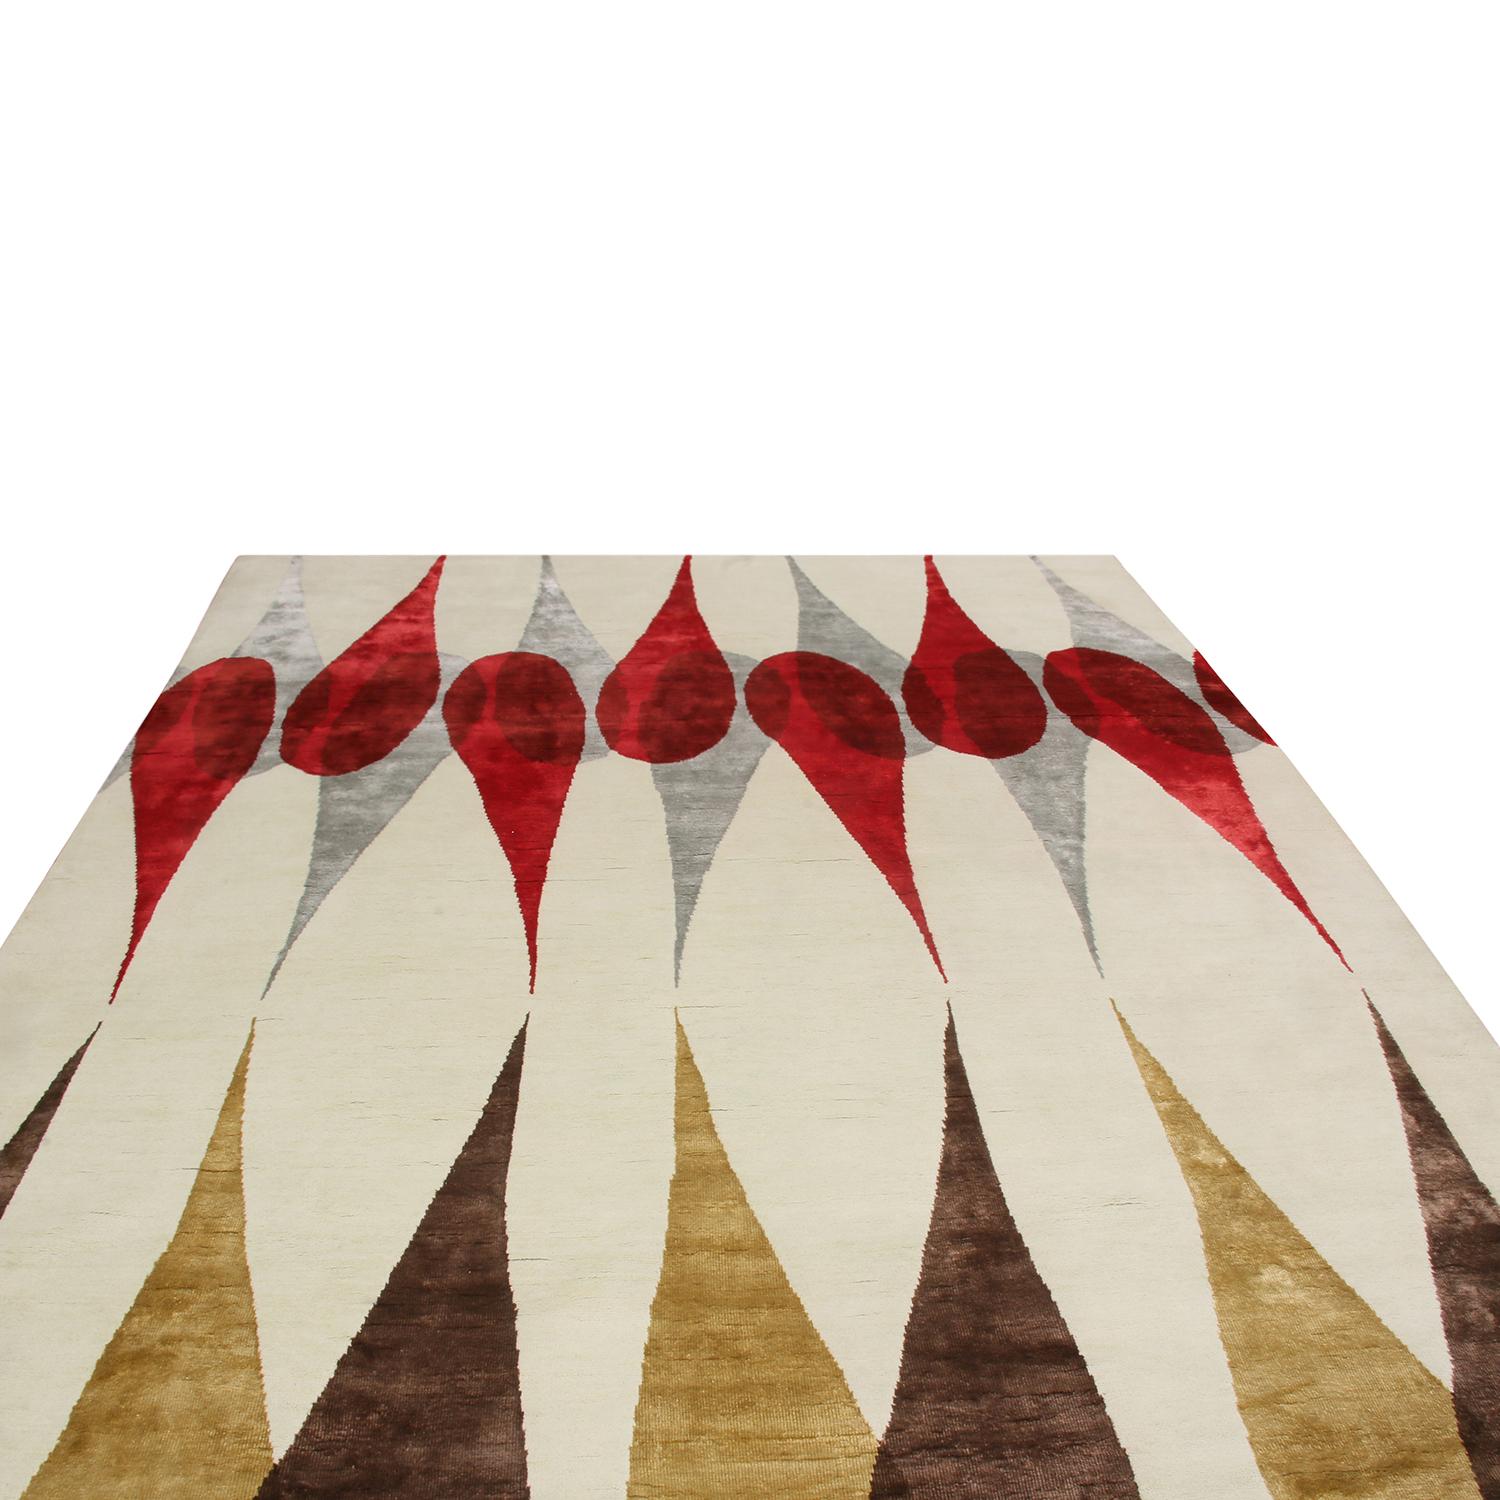 Hand knotted with quality semi-worsted wool, natural silk and exotic yarns, this geometric rug is among the latest additions to Rug & Kilim’s Mid-Century Modern Collection, a custom-capable line recapturing an underrepresented, iconic period with an